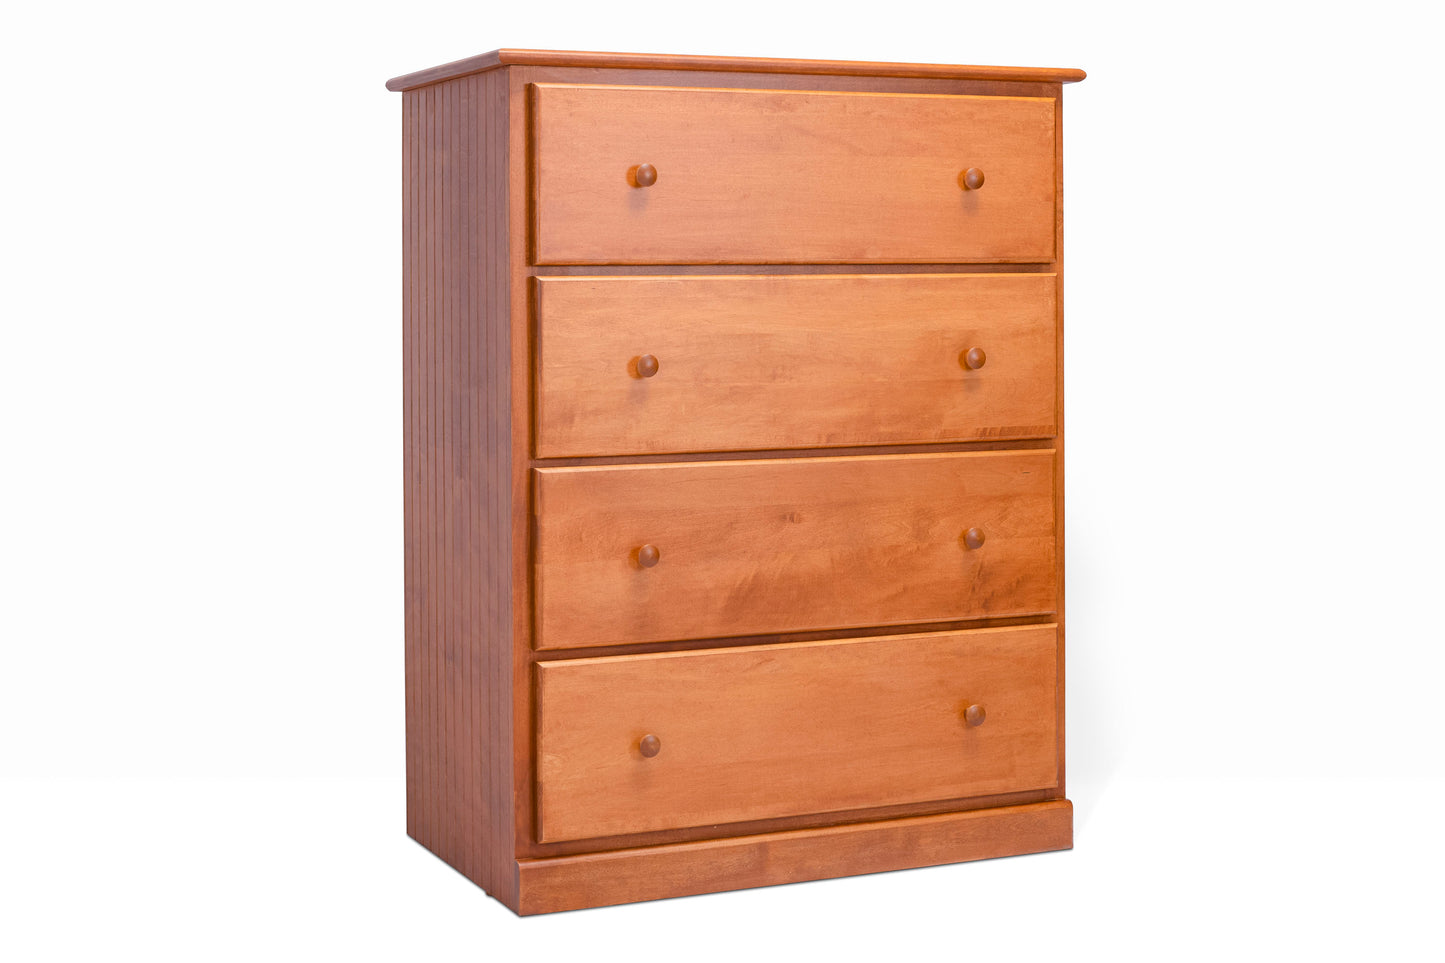 Acadia Cottage Chest: 4 drawers, rustic charm, nutmeg finish. Pictured from the front angle with bead board sides.